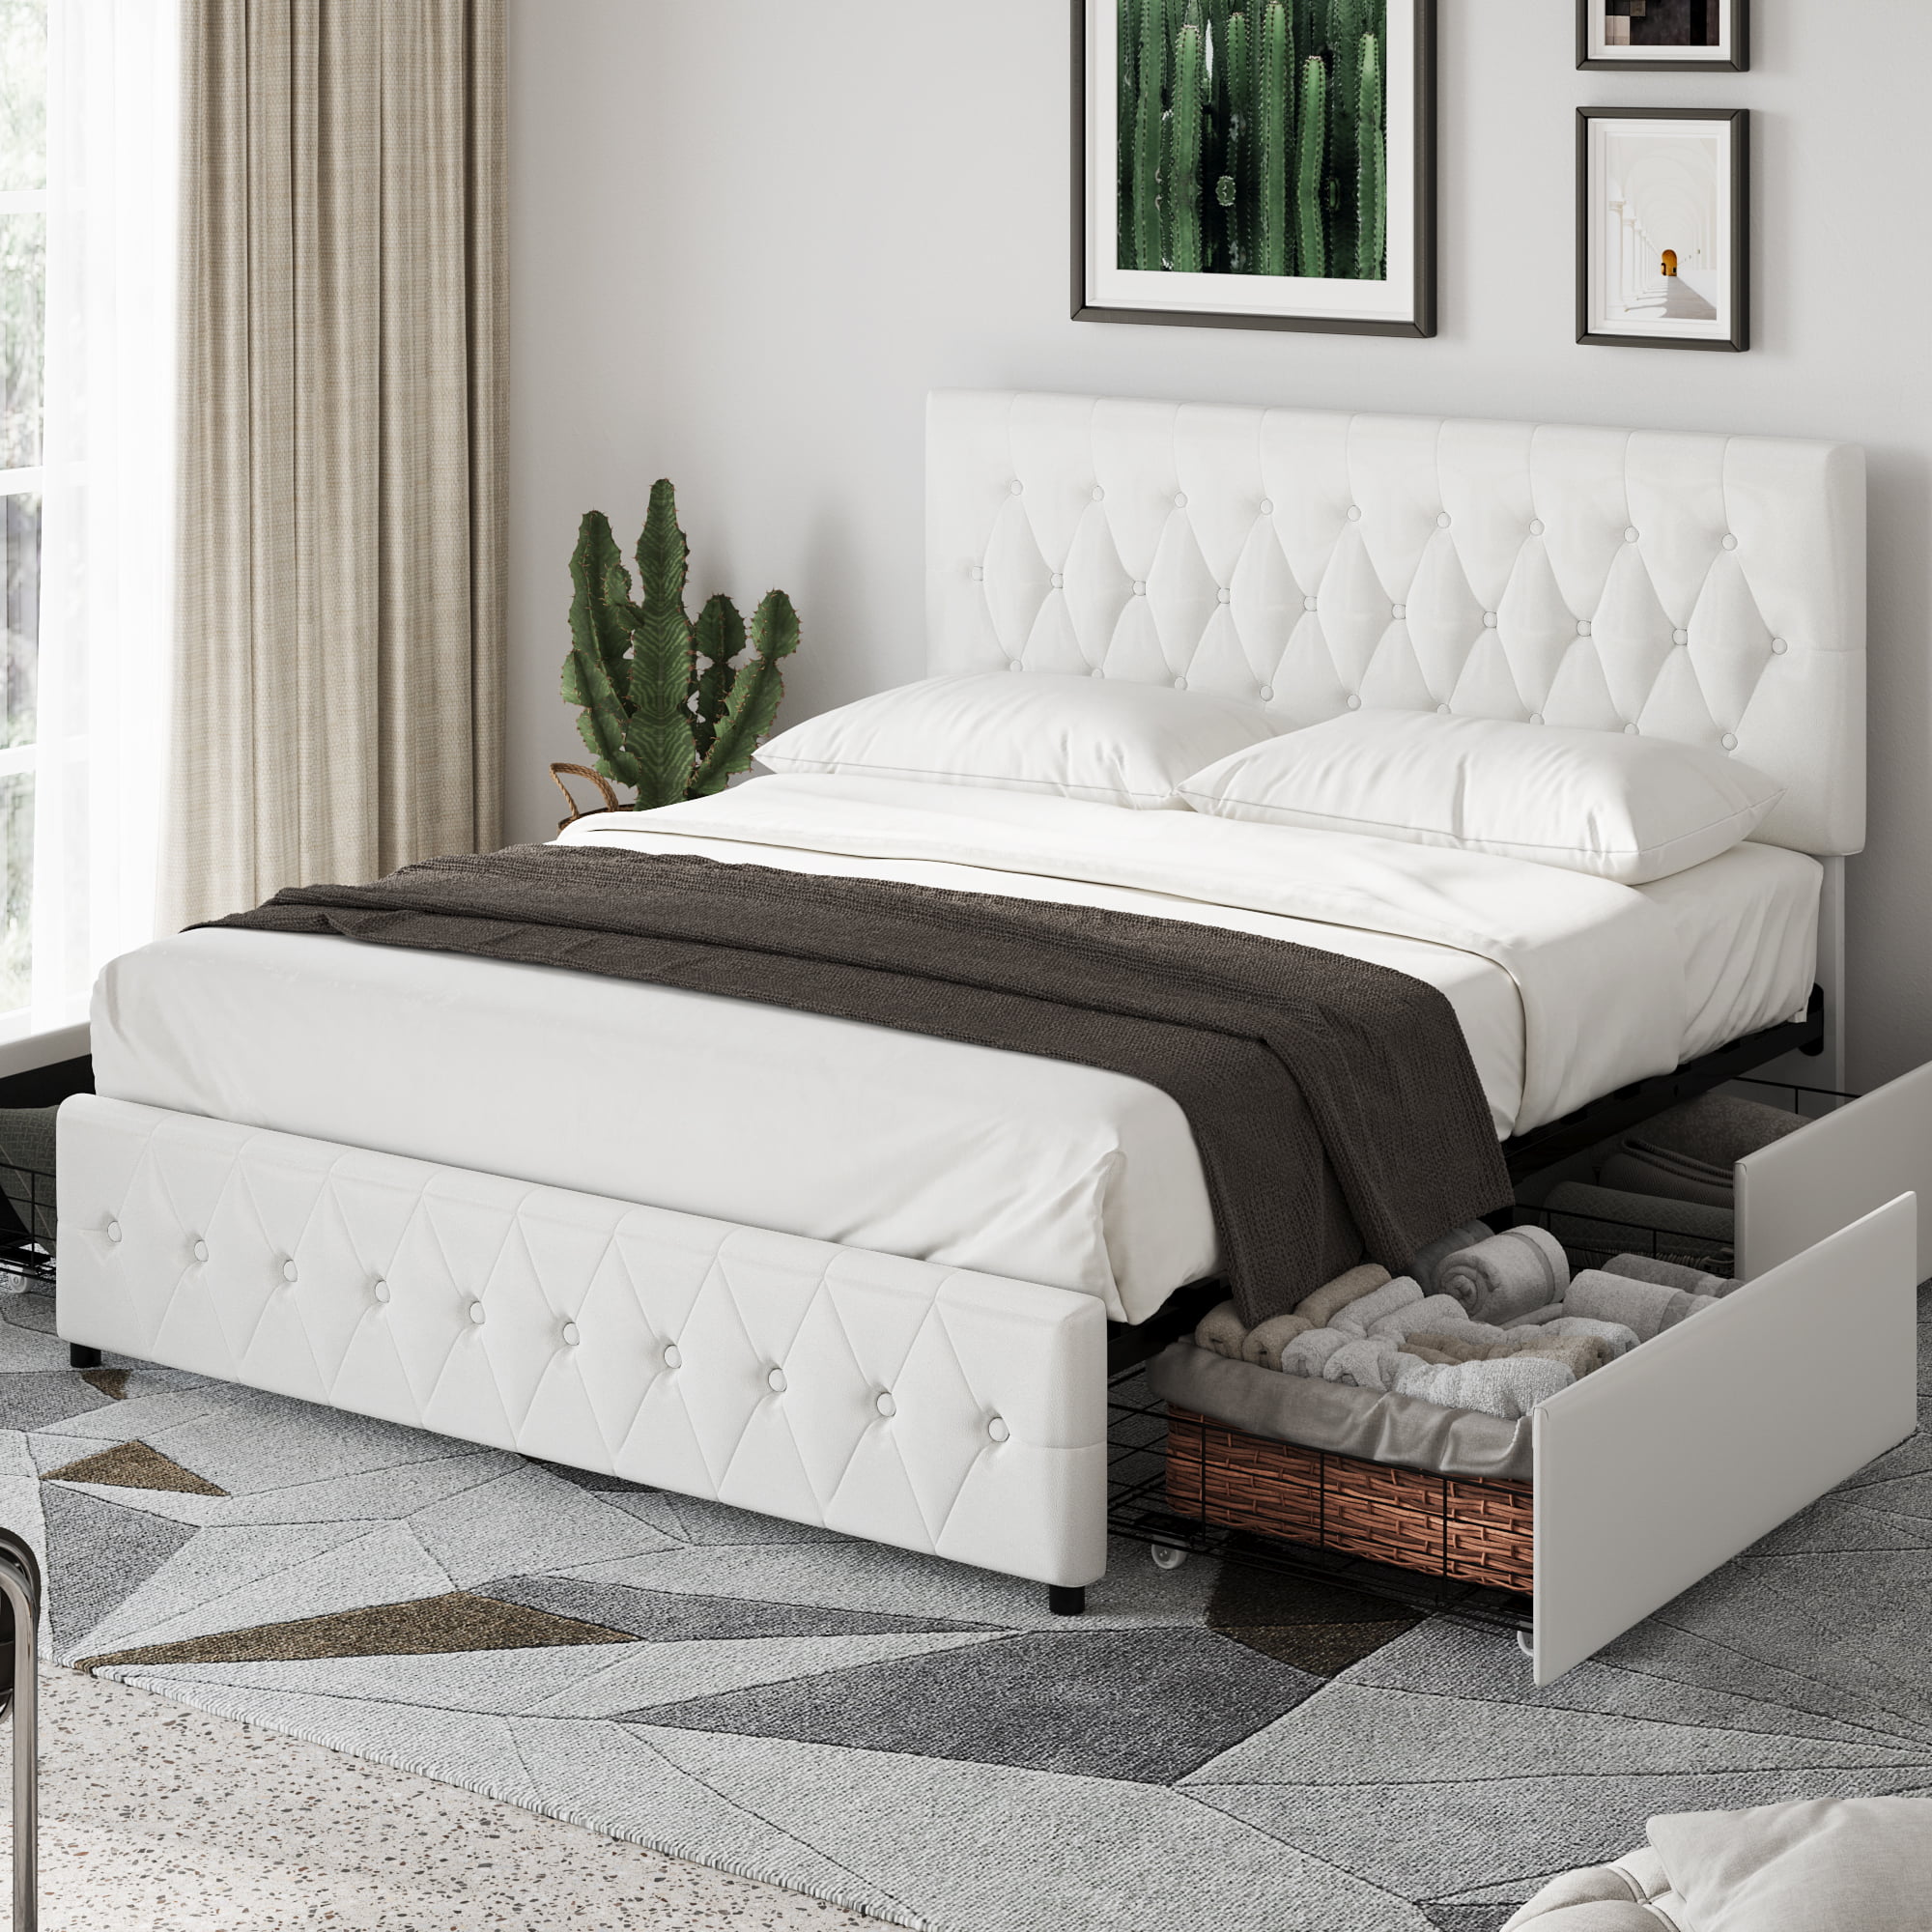 Homfa Full Bed Frame with 4 Drawers, White Faux Leather Storage ...